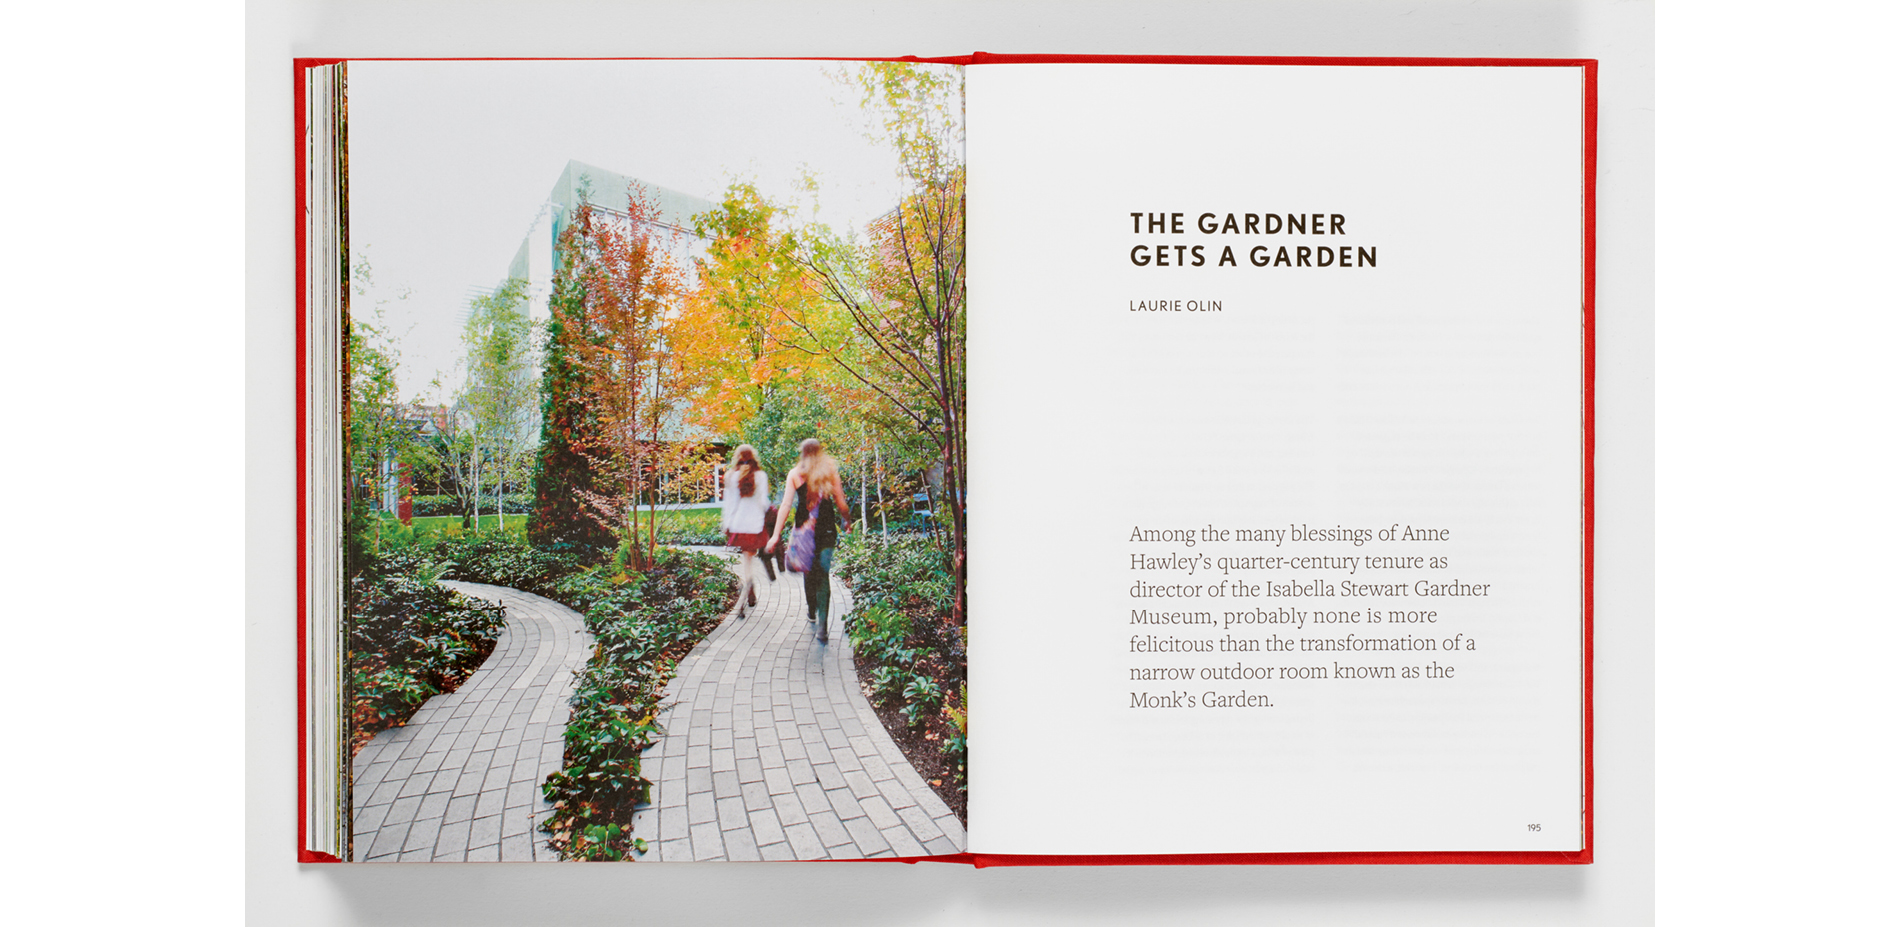 "The Gardner Gets a Garden" by Laurie Olin